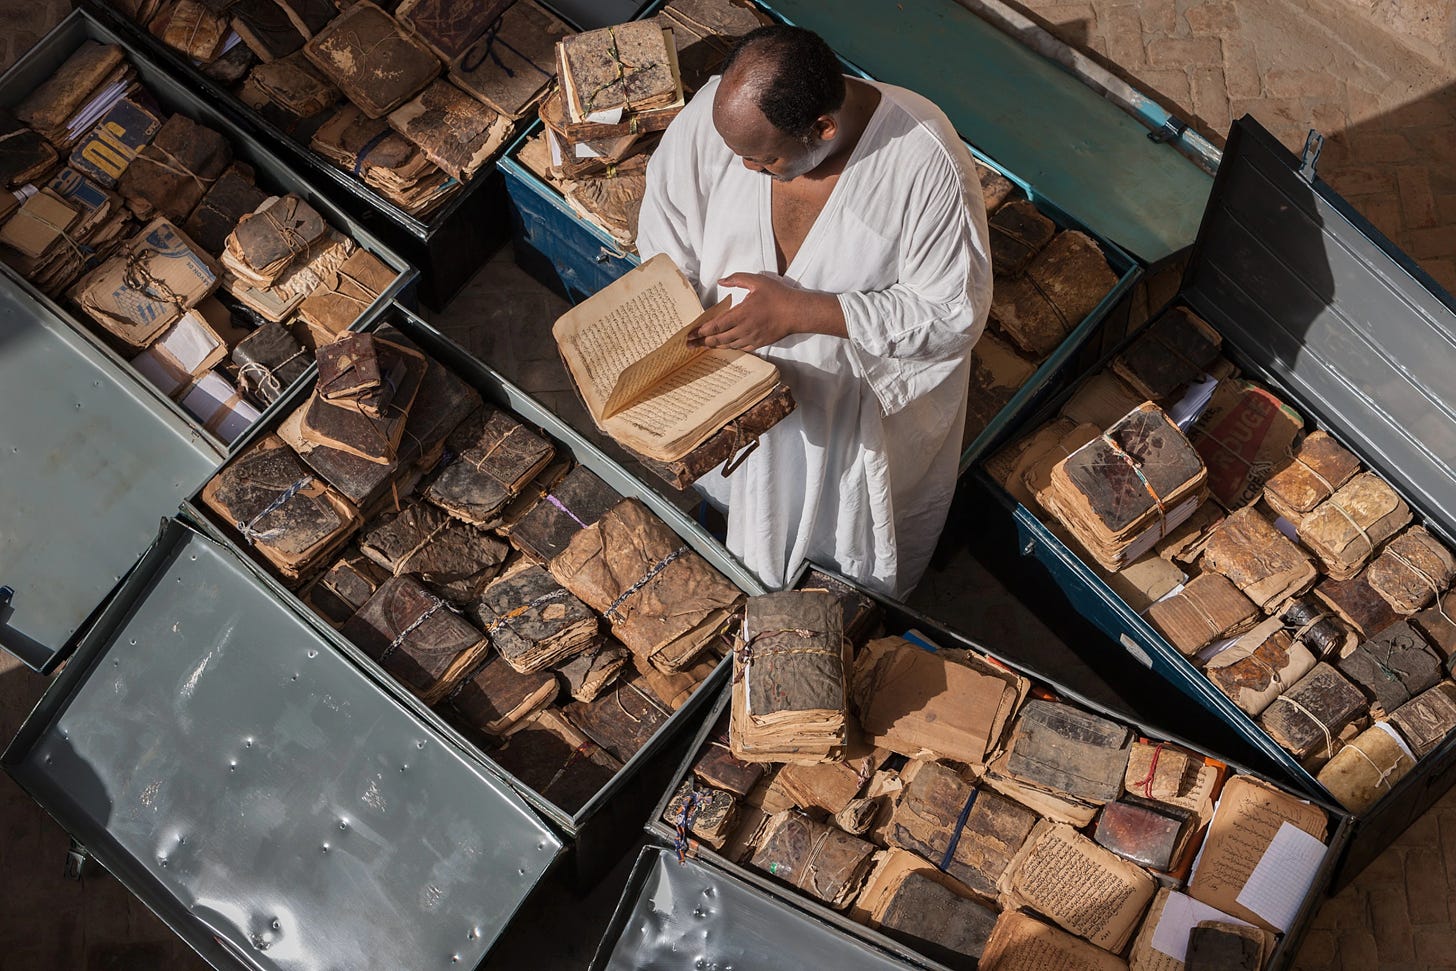 Picture of a man surrounded by lockers full of old-looking books, image taken from above